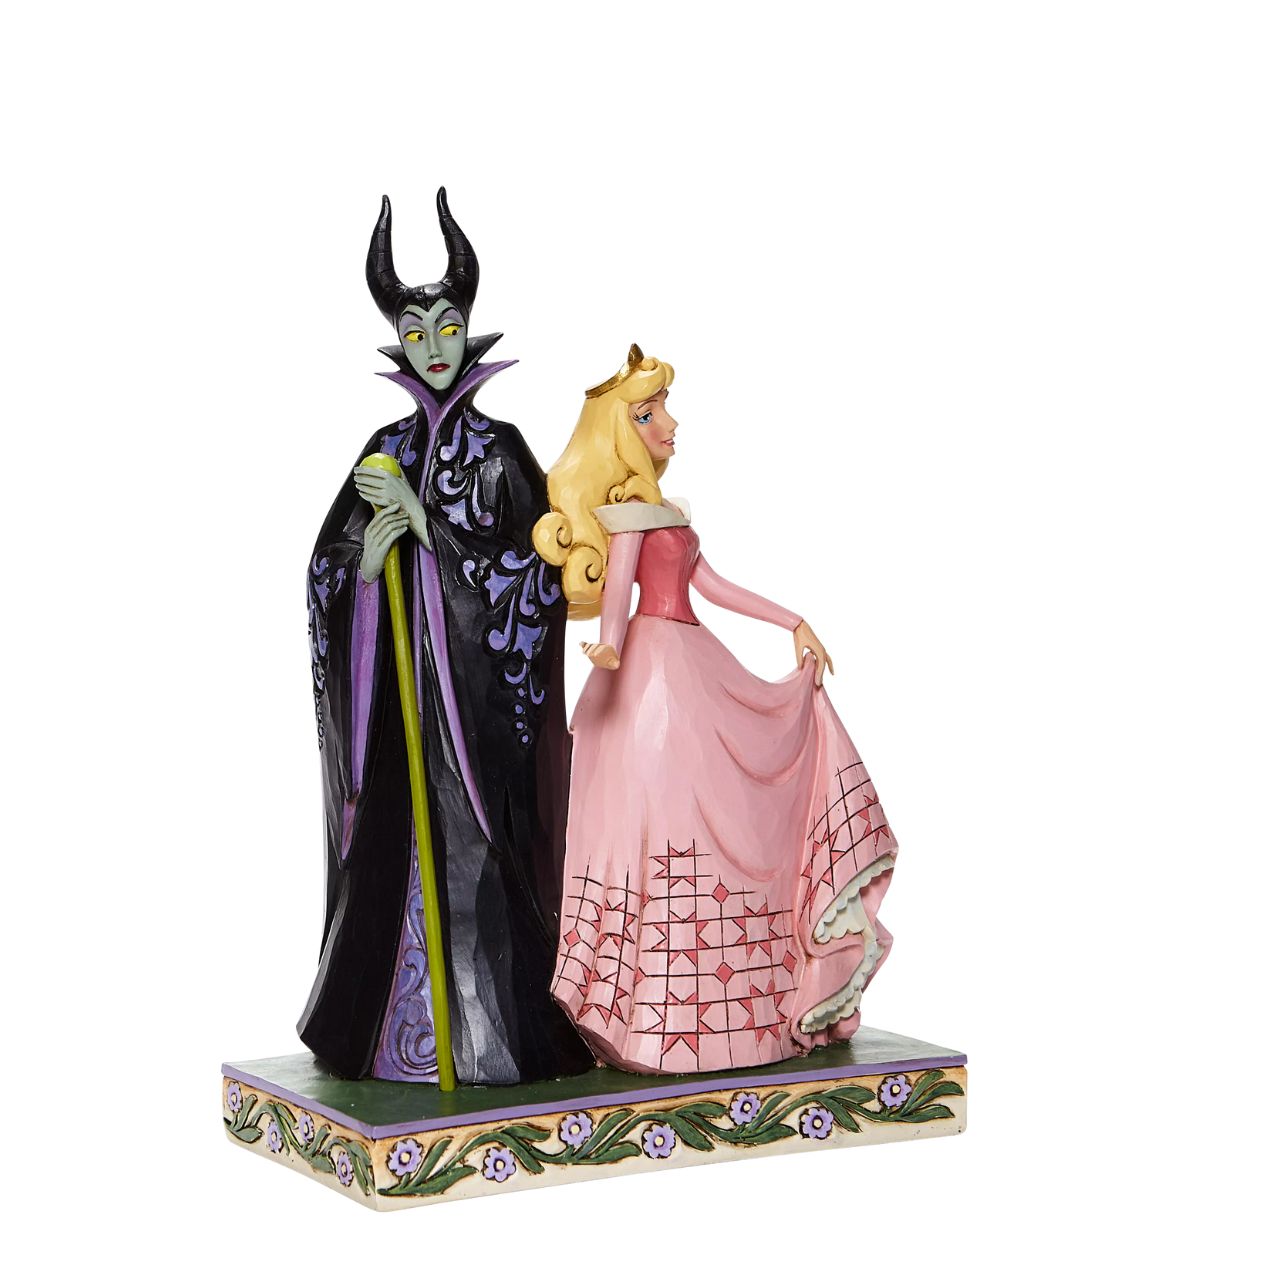 Disney Sorcery and Serenity - Aurora and Maleficent Figurine  Consumed with bitterness and spiteful rage the evil sorceress Maleficent looks down upon Princess Aurora with undisguised contempt. Aurora unfazed by Maleficents baleful glare maintains her grace and poise even as her black clad nemesis plots against her.